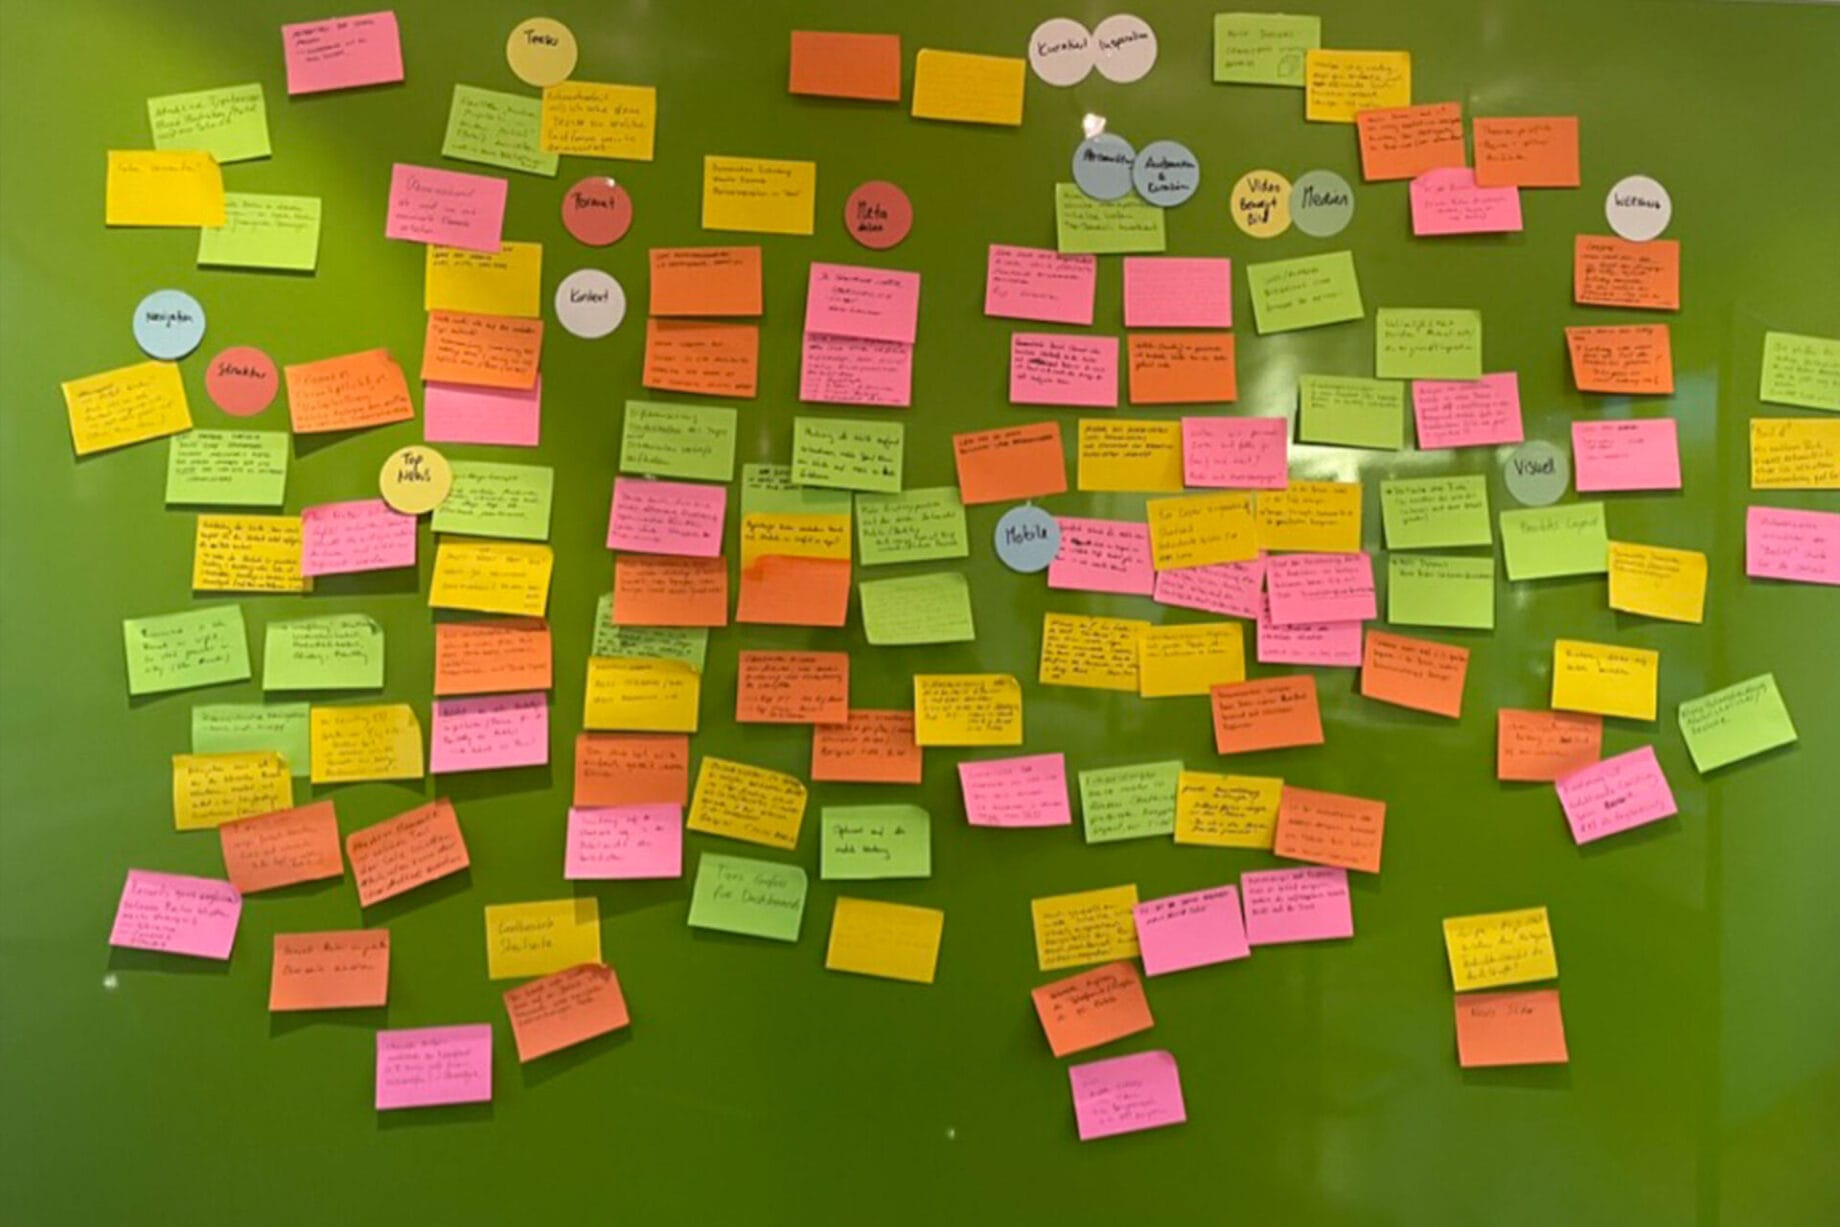 Post its on a green pin poard clustering the ideas and topics of the front-page concept